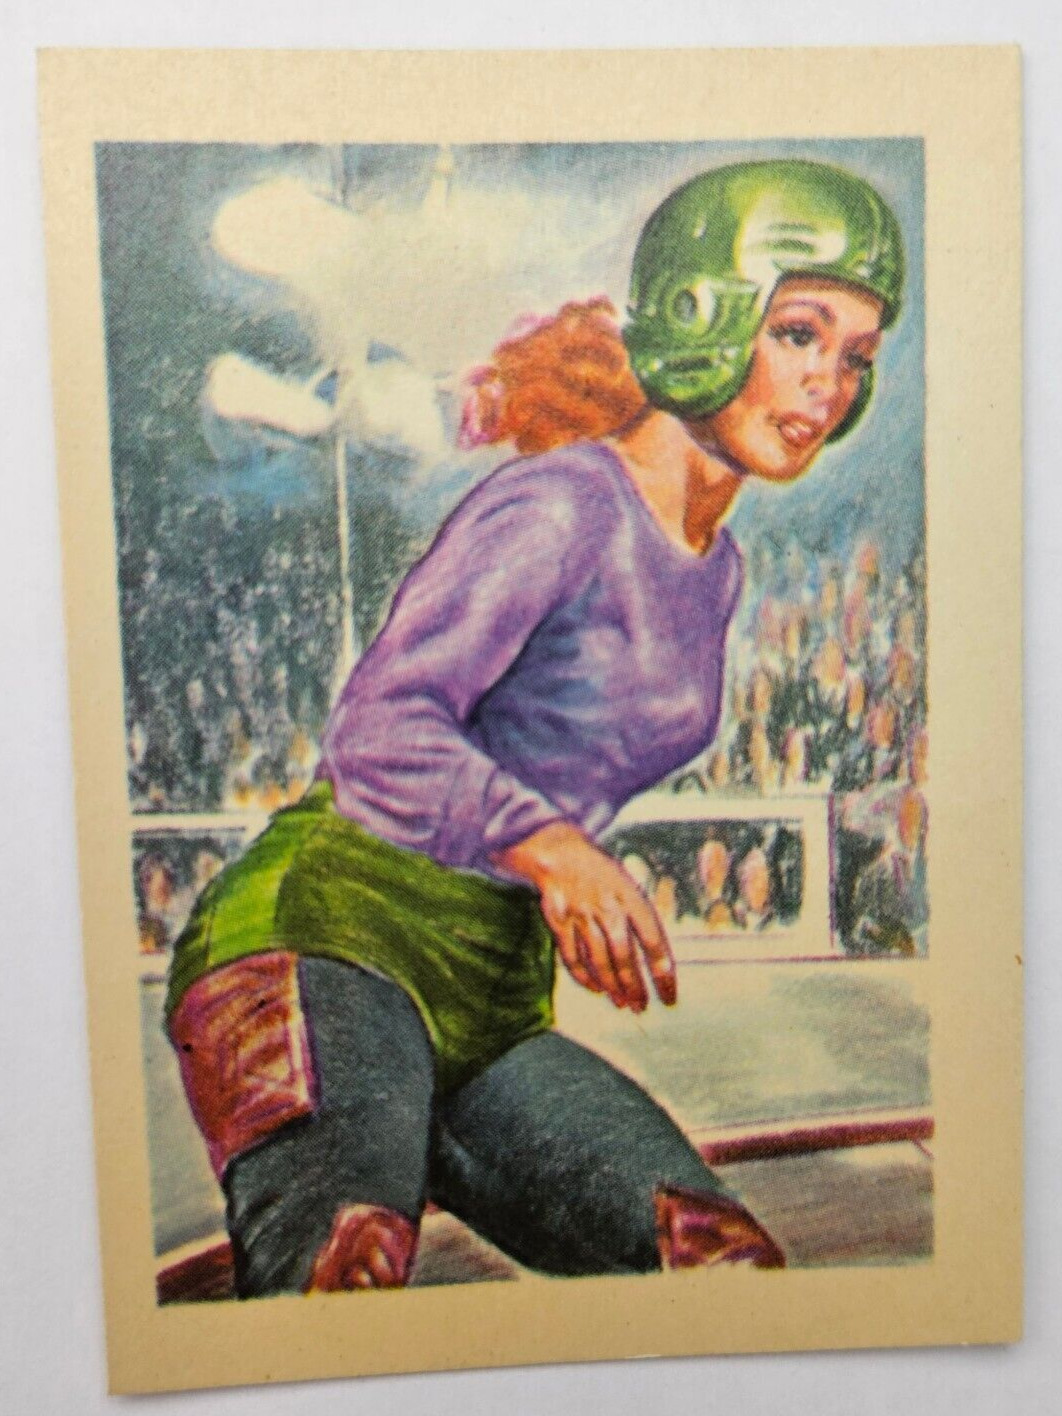 1956 Adventure Gum #81 Letting Loose on the Boards Roller Derby